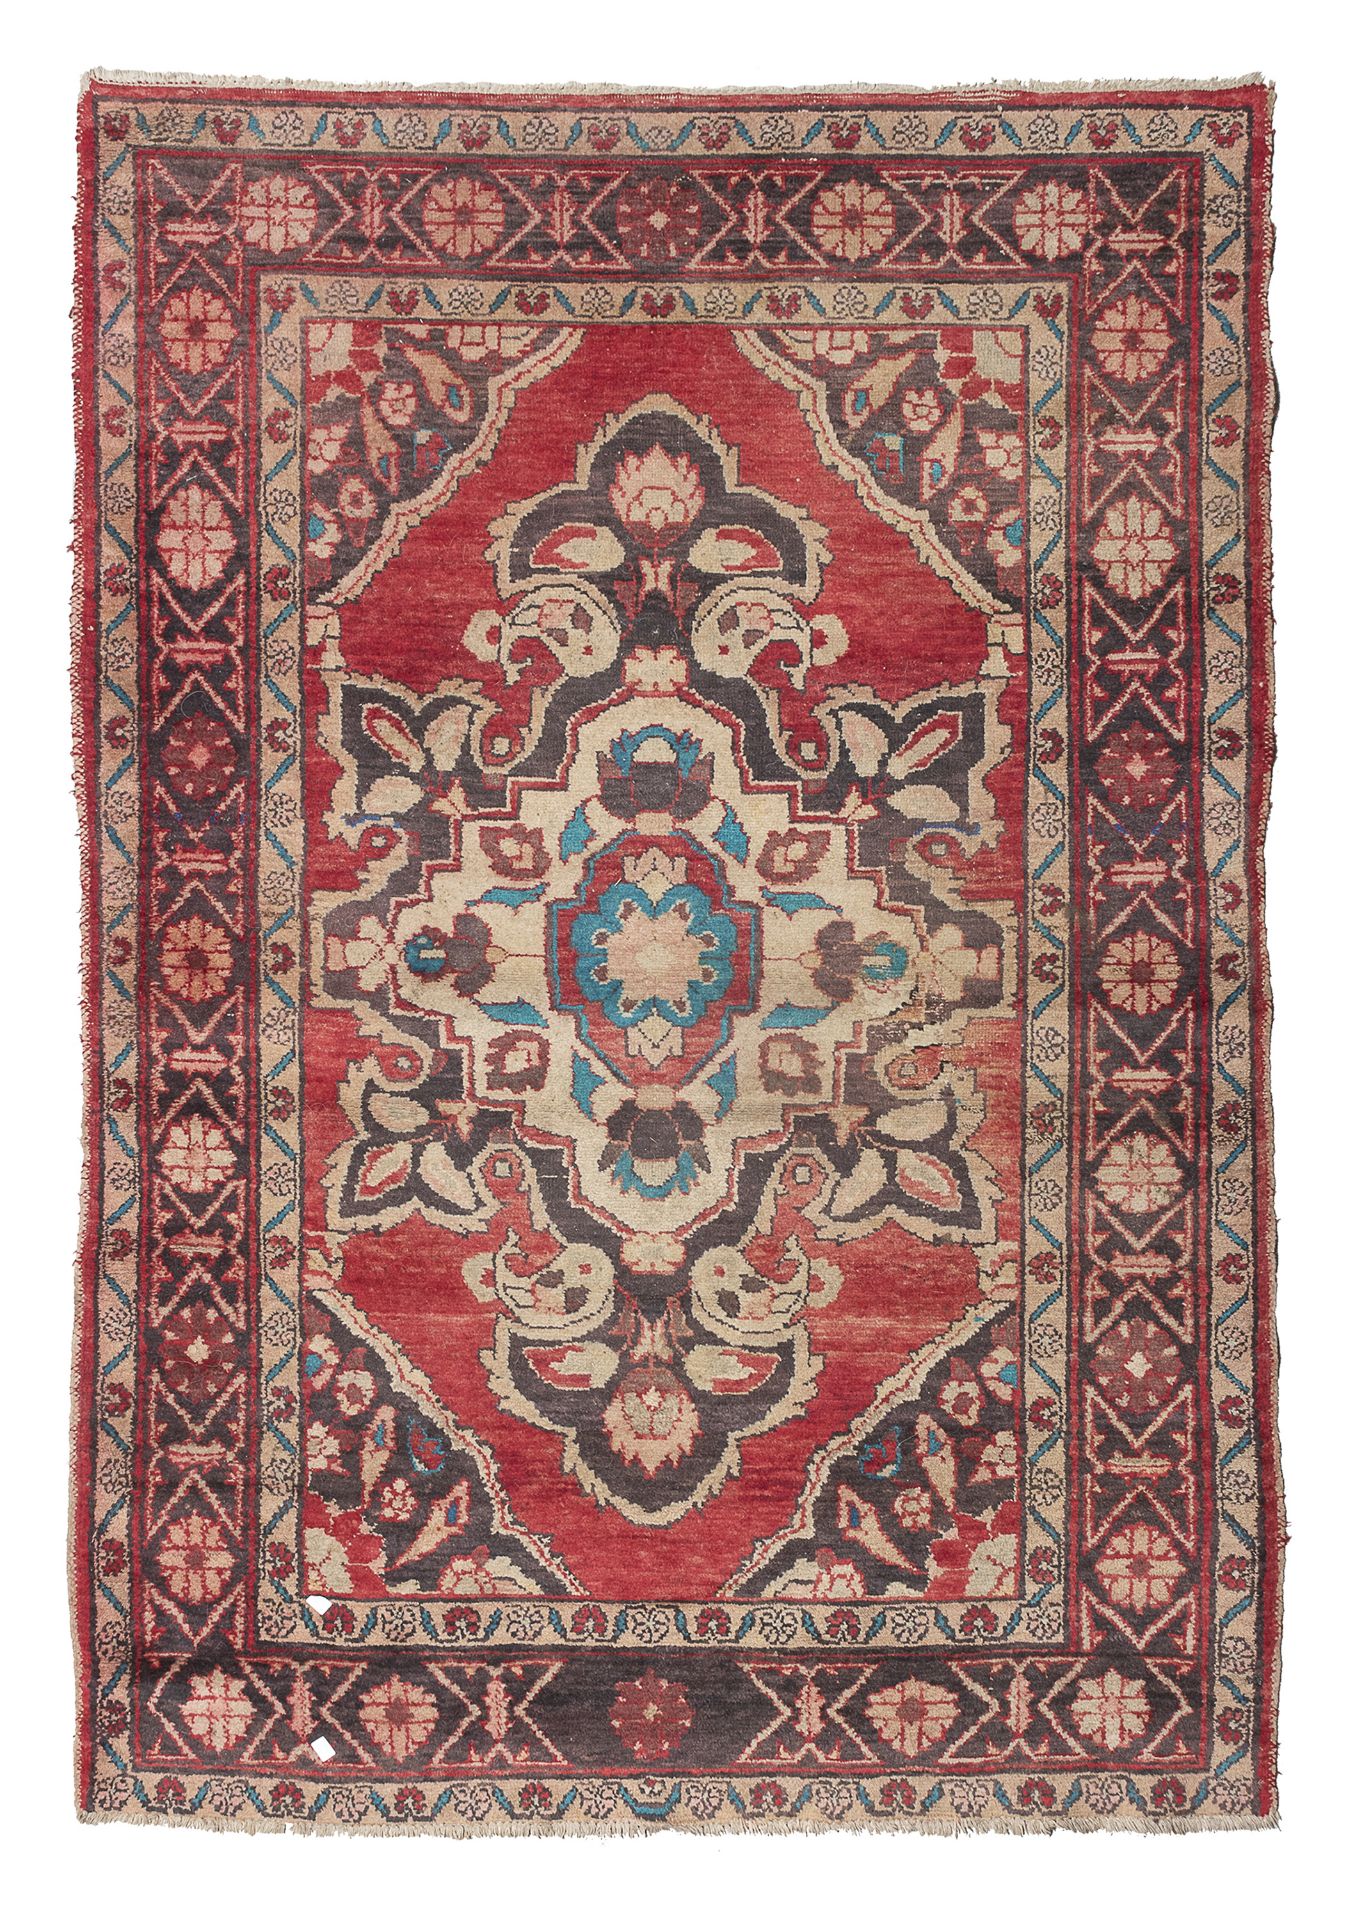 NORTH PERSIAN CARPET EARLY 20TH CENTURY